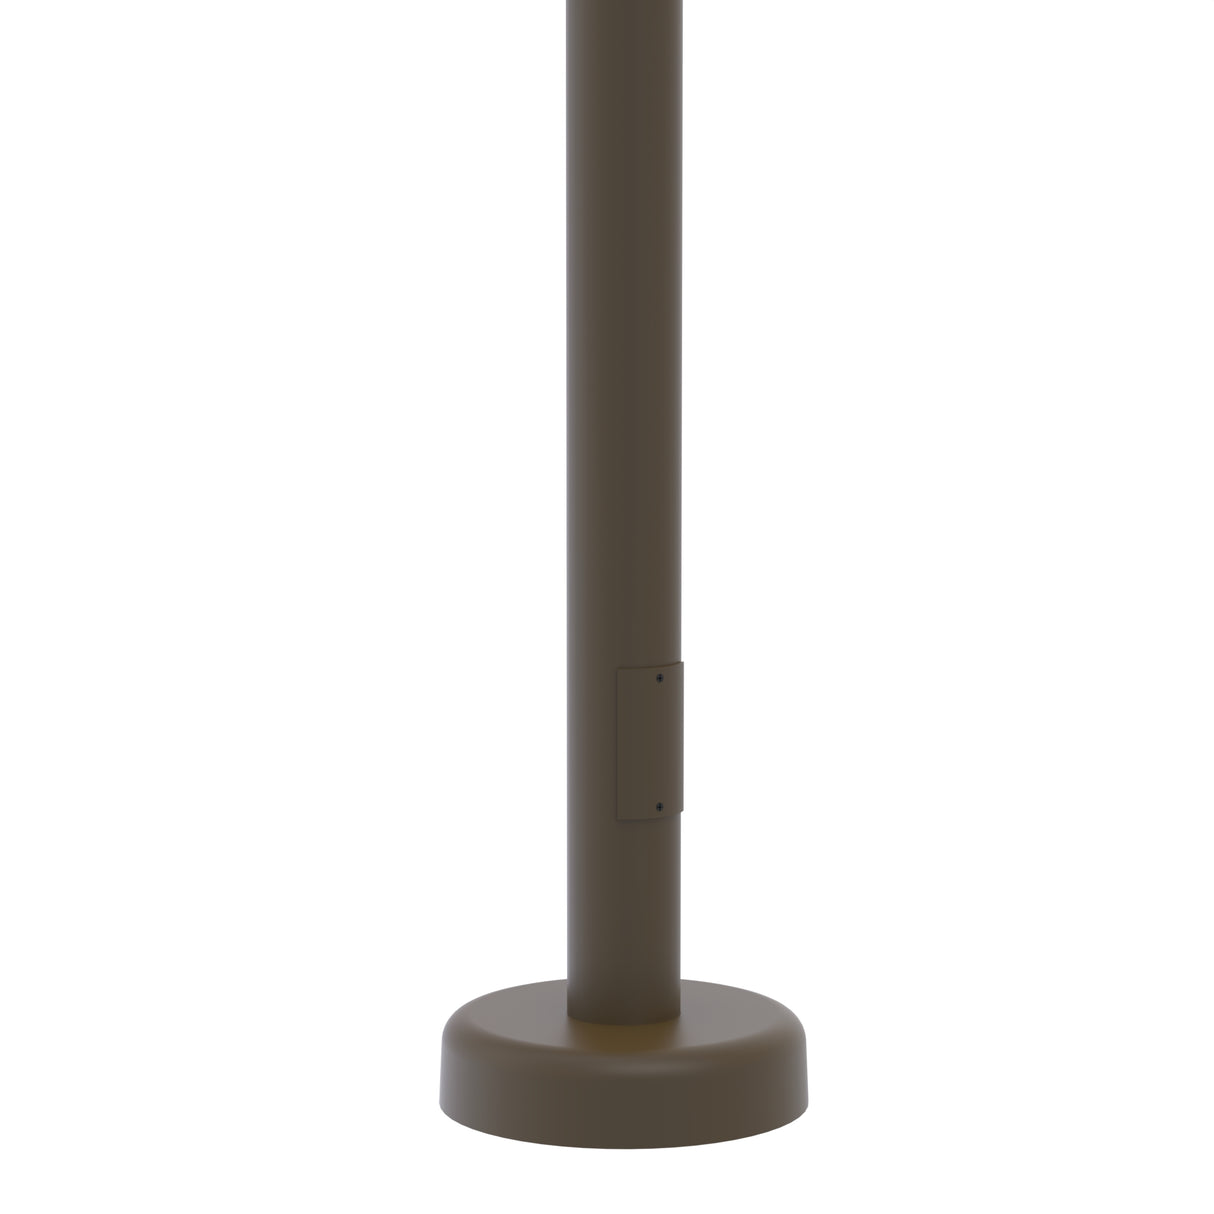 12' Tall x 5.0" OD x 0.156" Thick, Round Straight Aluminum, Hinged Anchor Base Light Pole